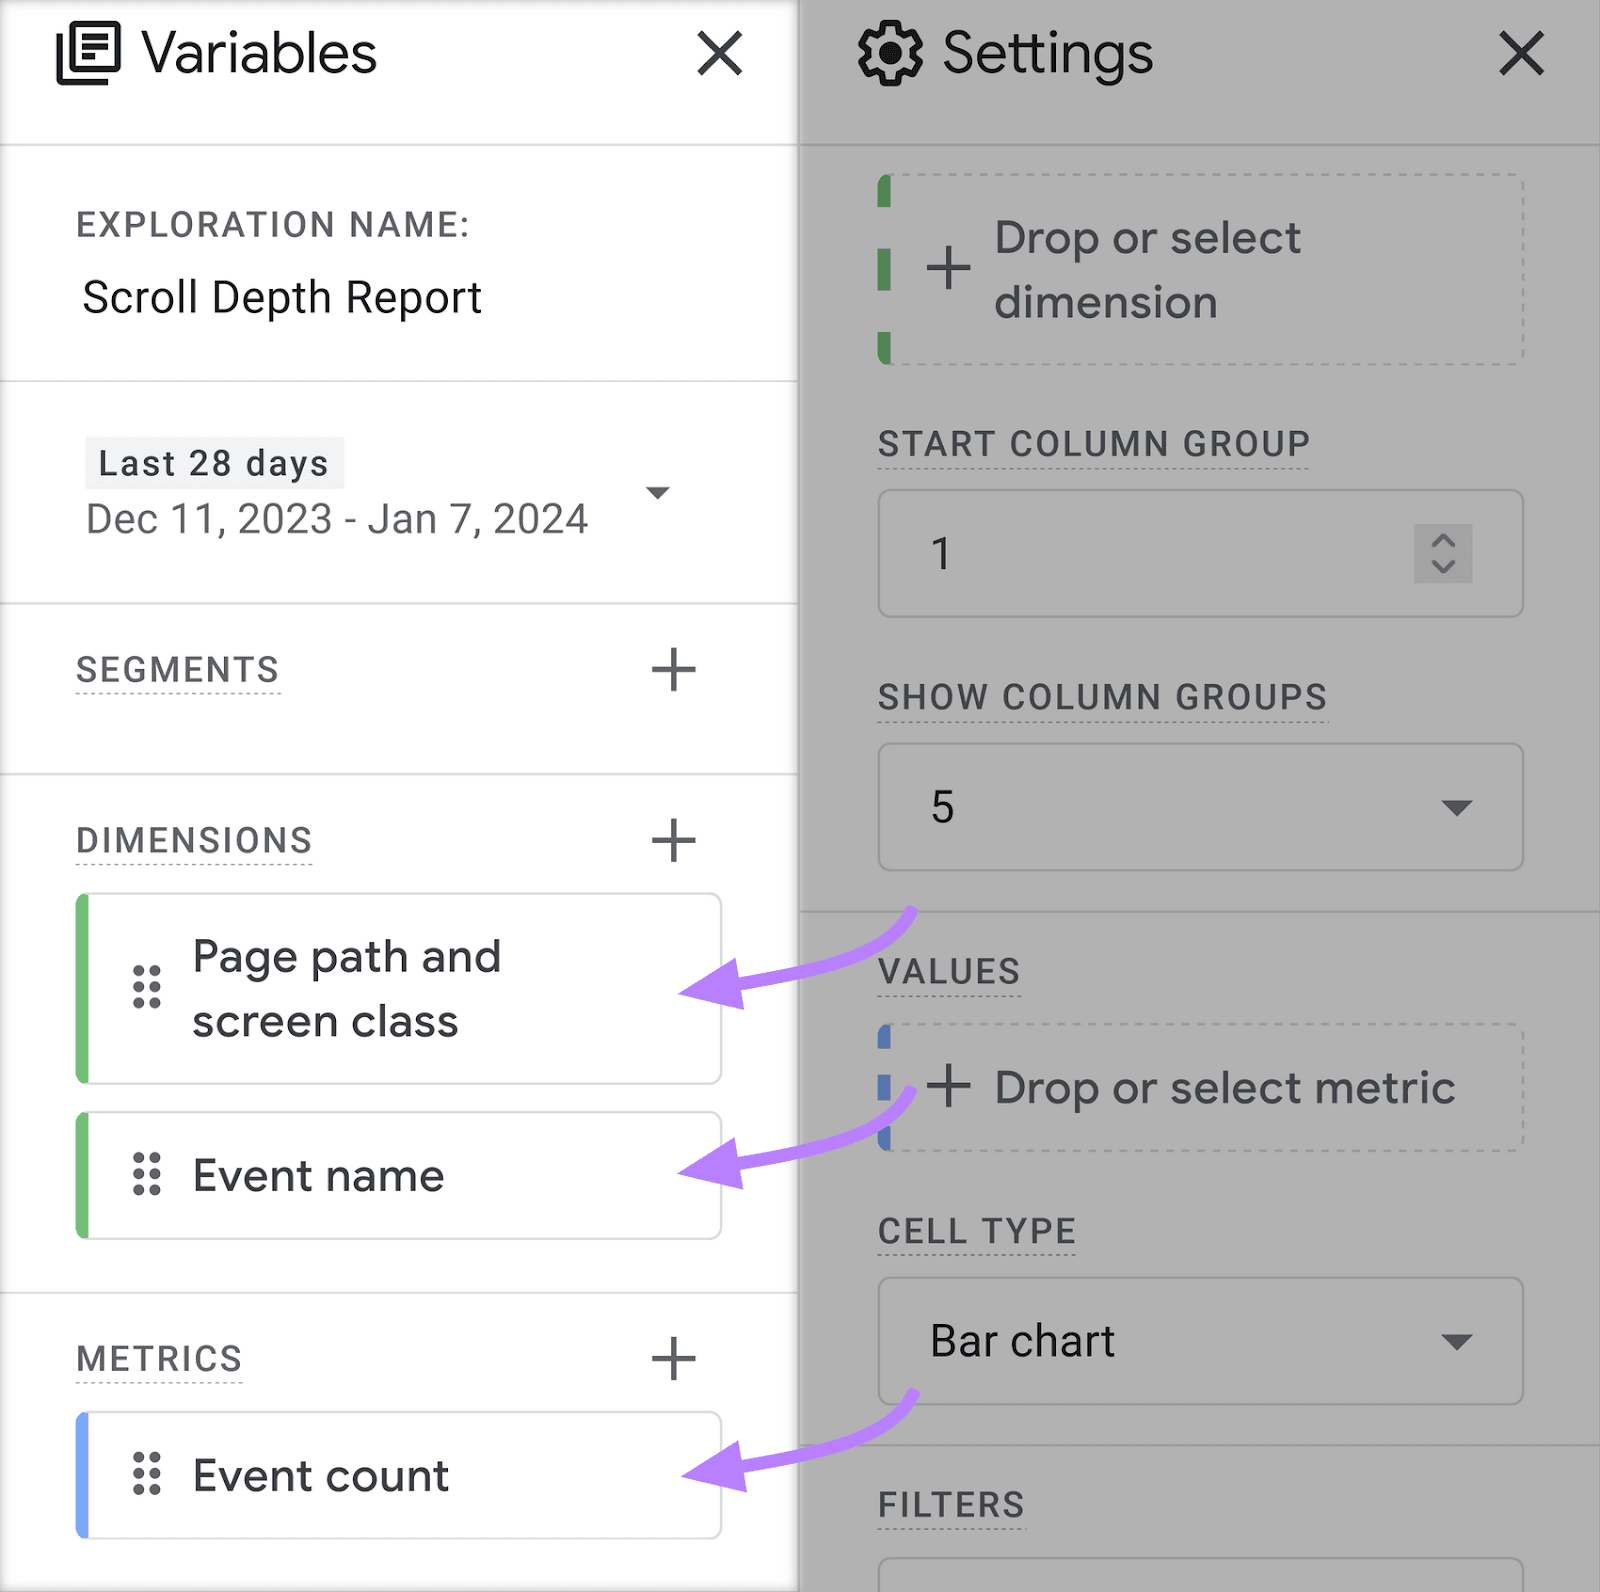 "Dimensions" and "Metrics" fields highlighted under "Variables" window